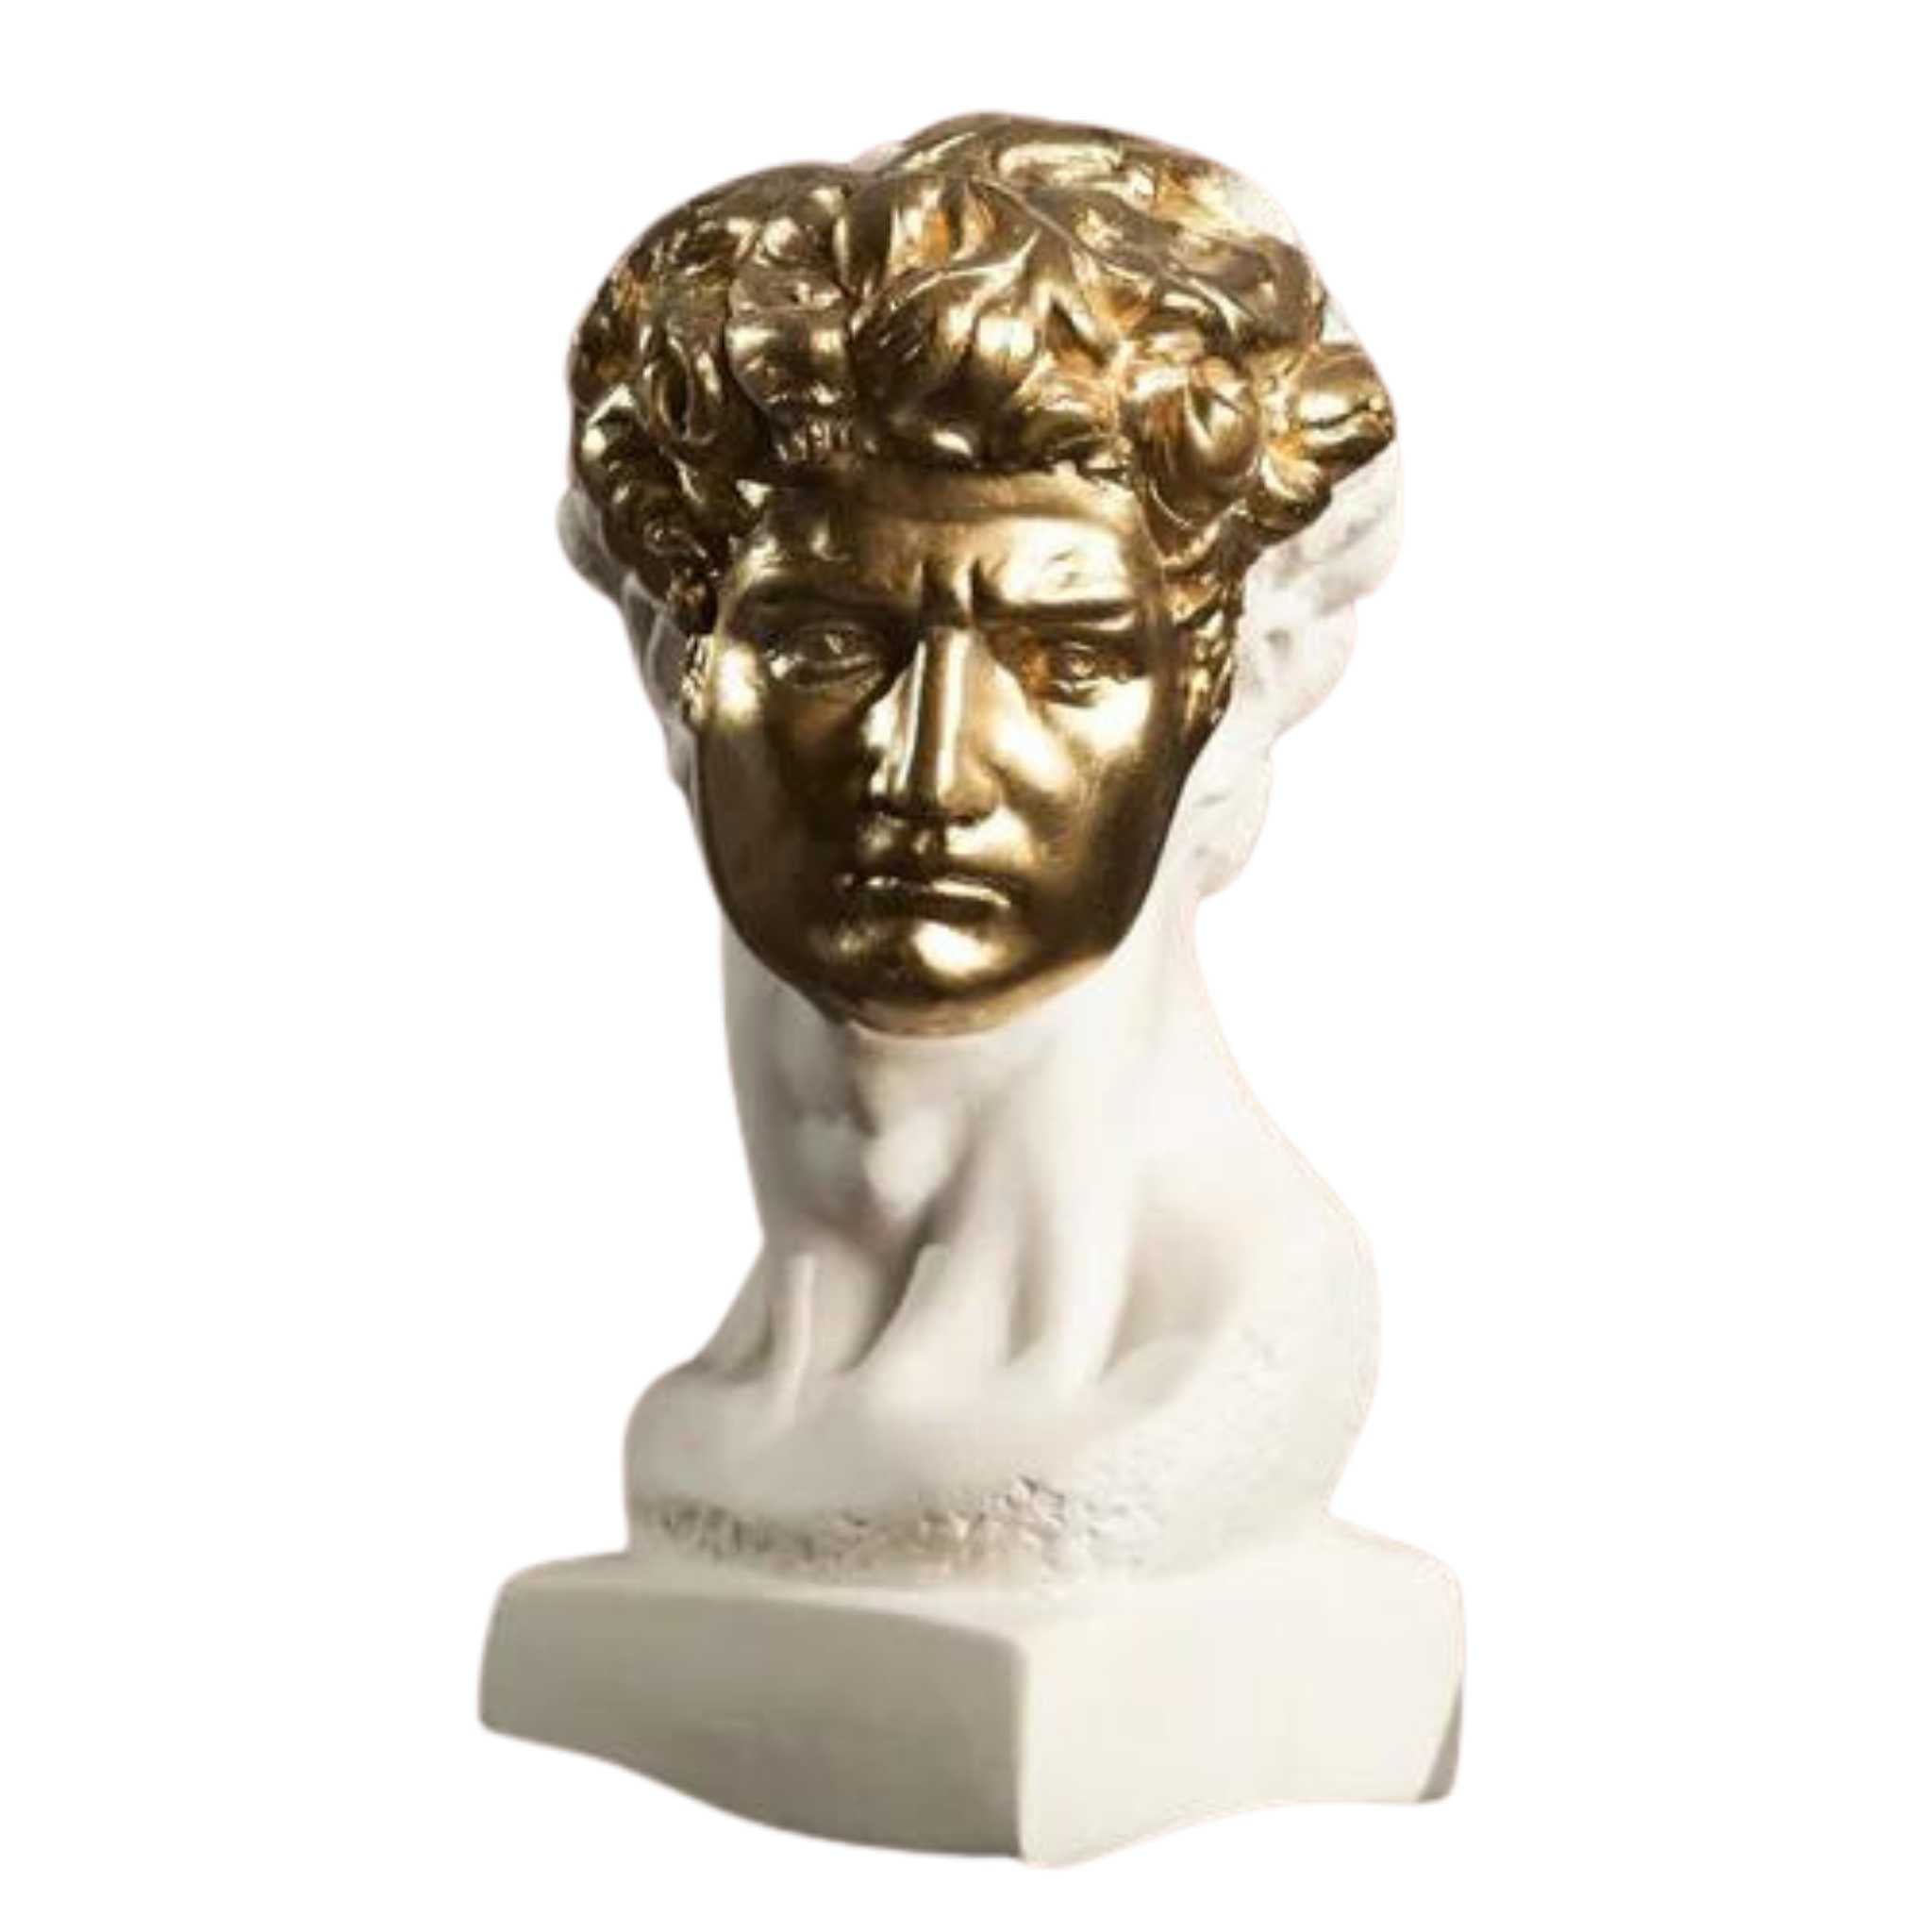 Golden Glory: The David with Mask